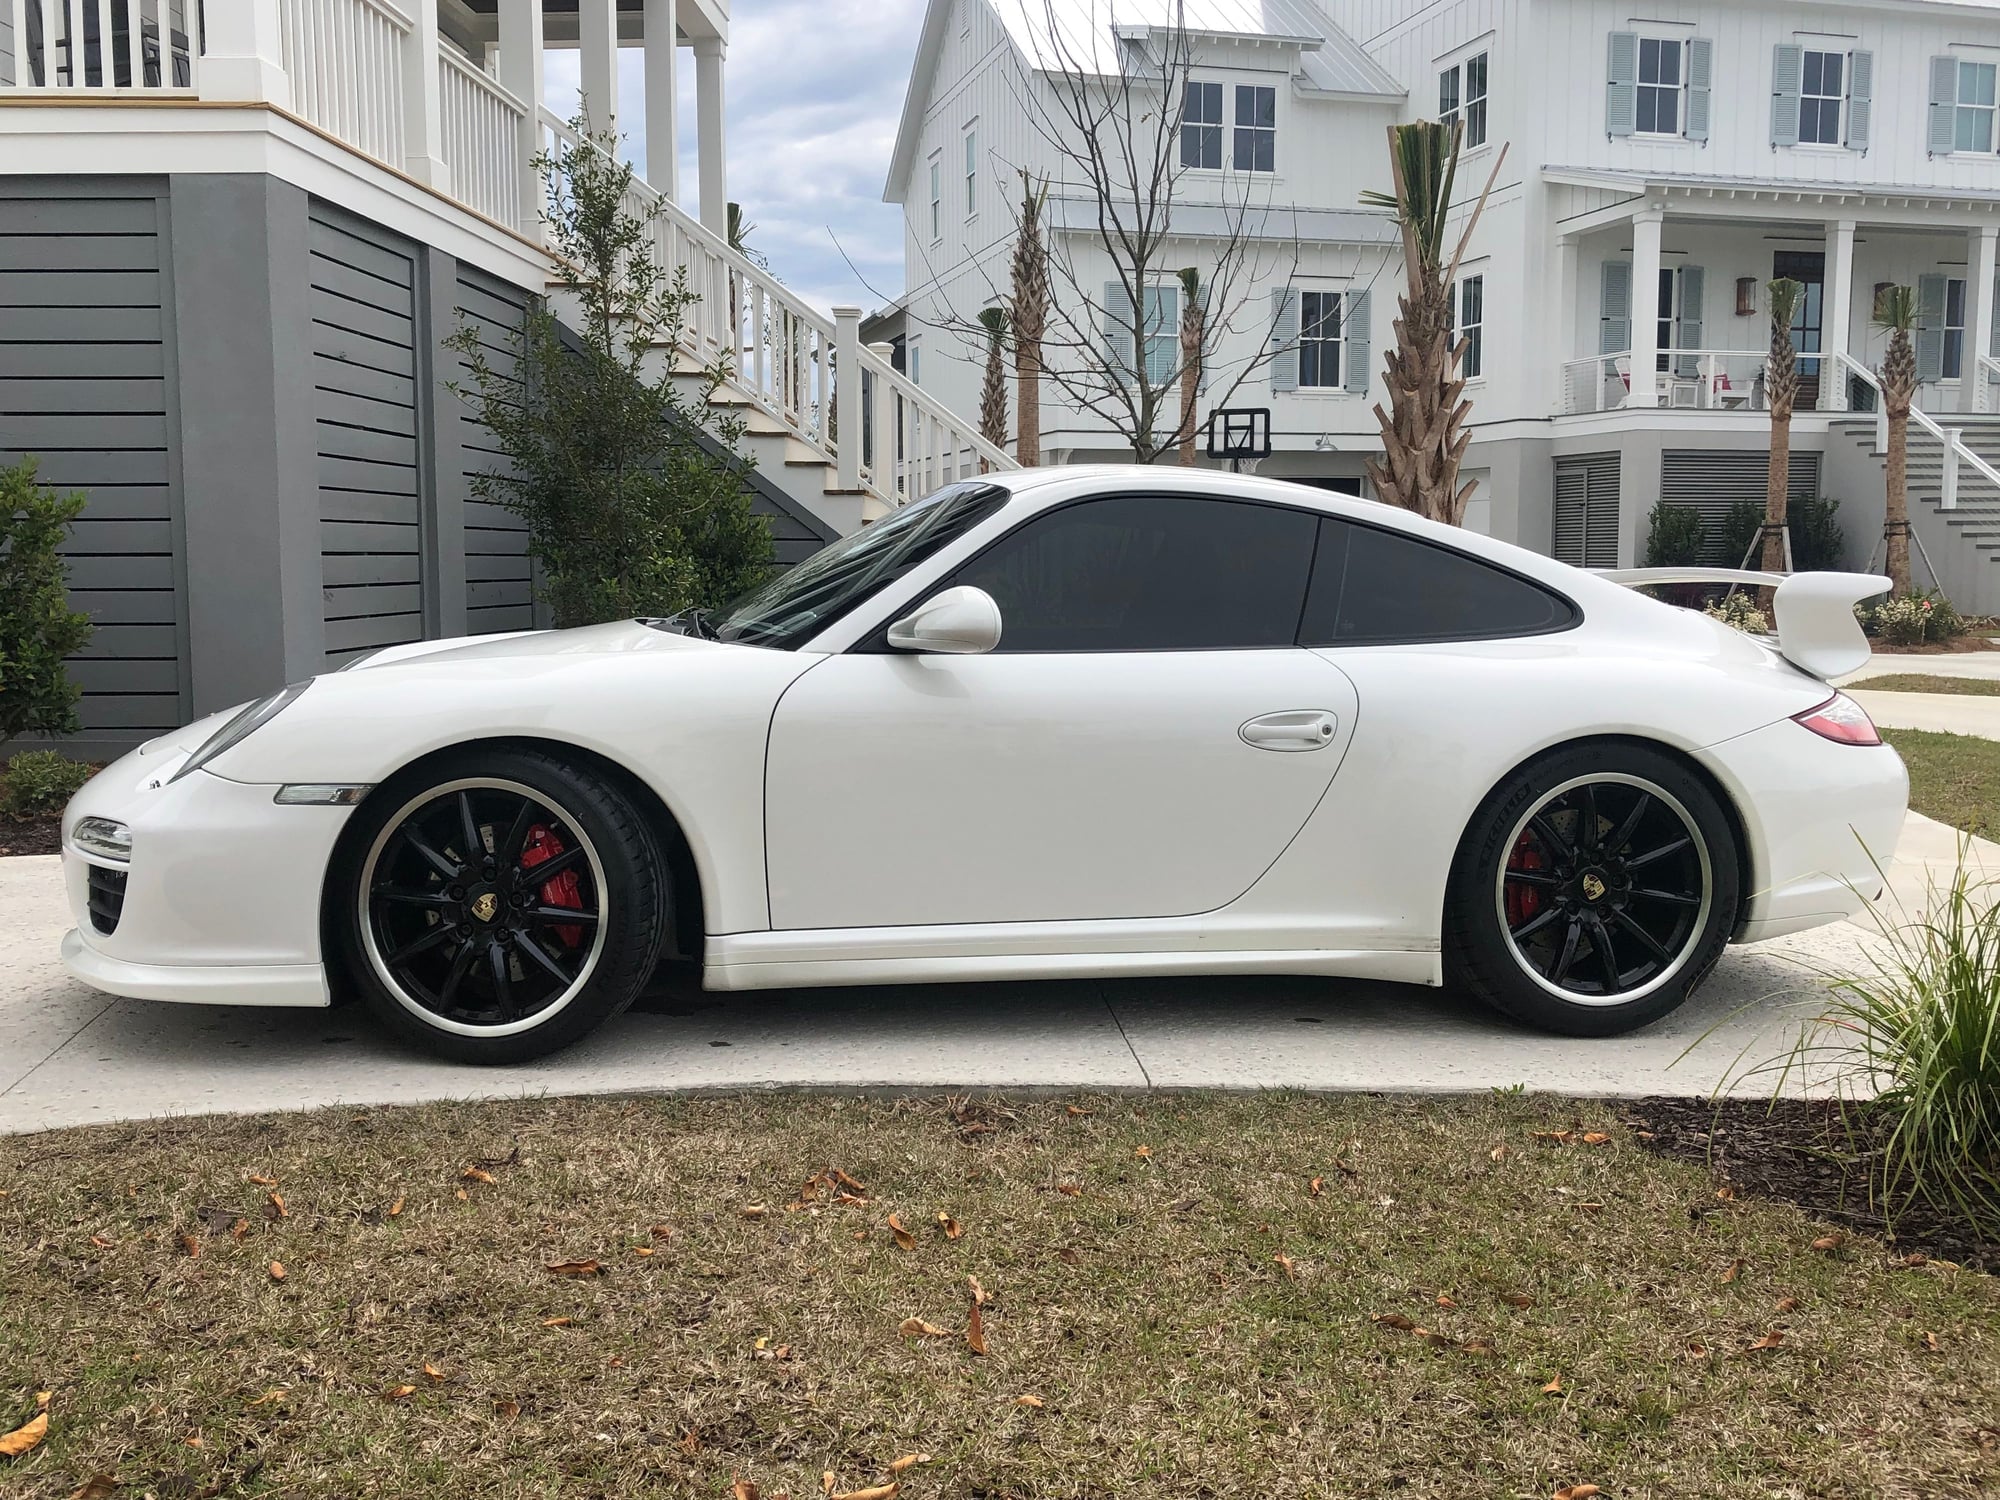 2011 Porsche 911 - 2011 911 GTS Coupe PDK white/blk - Used - VIN WP0AB2A99BS720671 - 49,400 Miles - 6 cyl - 2WD - Automatic - Coupe - White - Daniel Island, SC 29492, United States